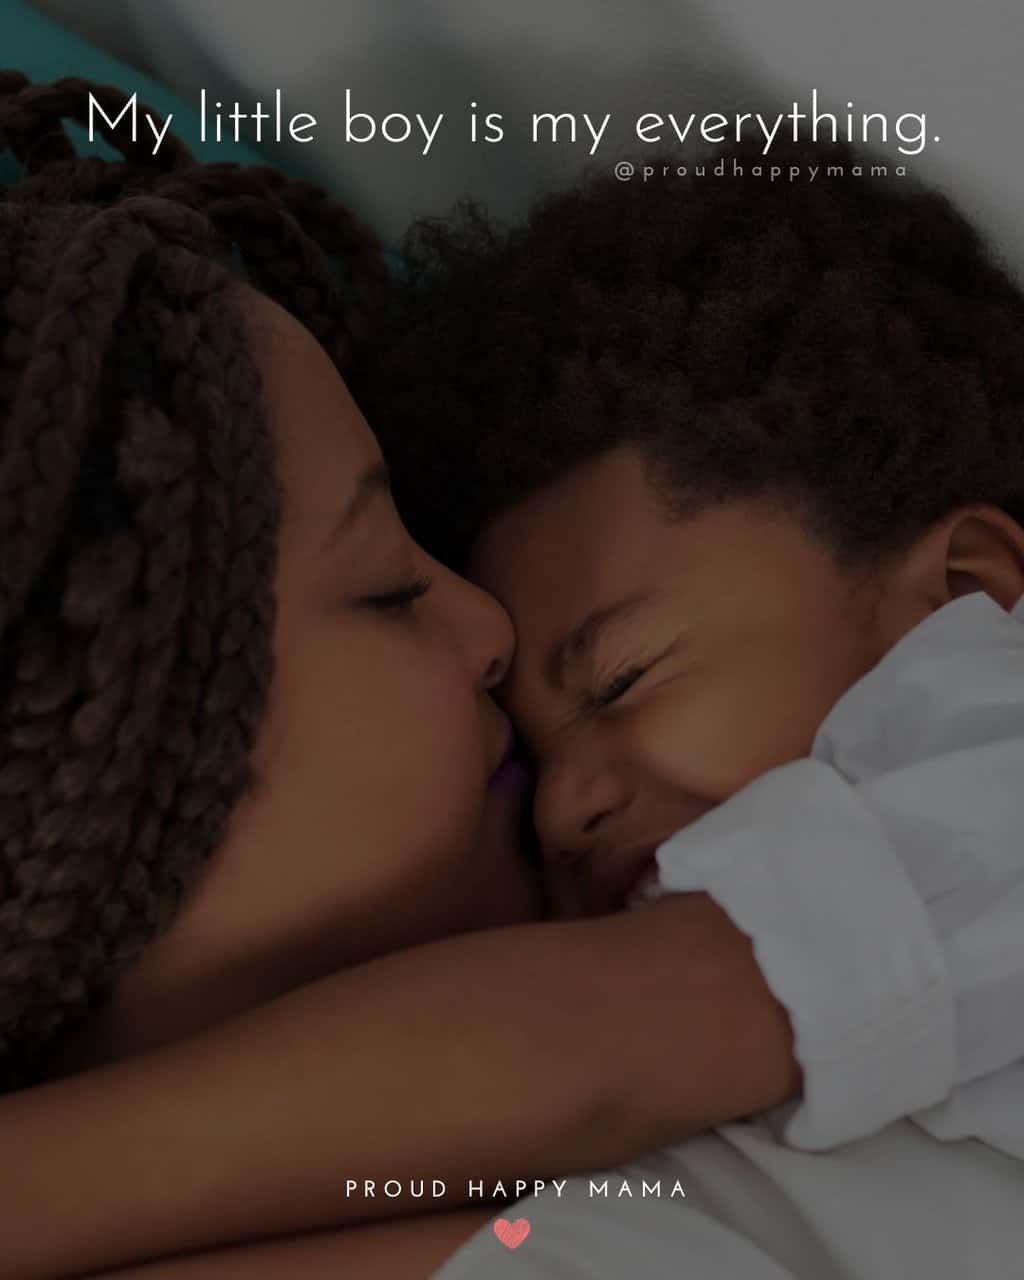 Cute little boy quotes - My little boy is my everything.